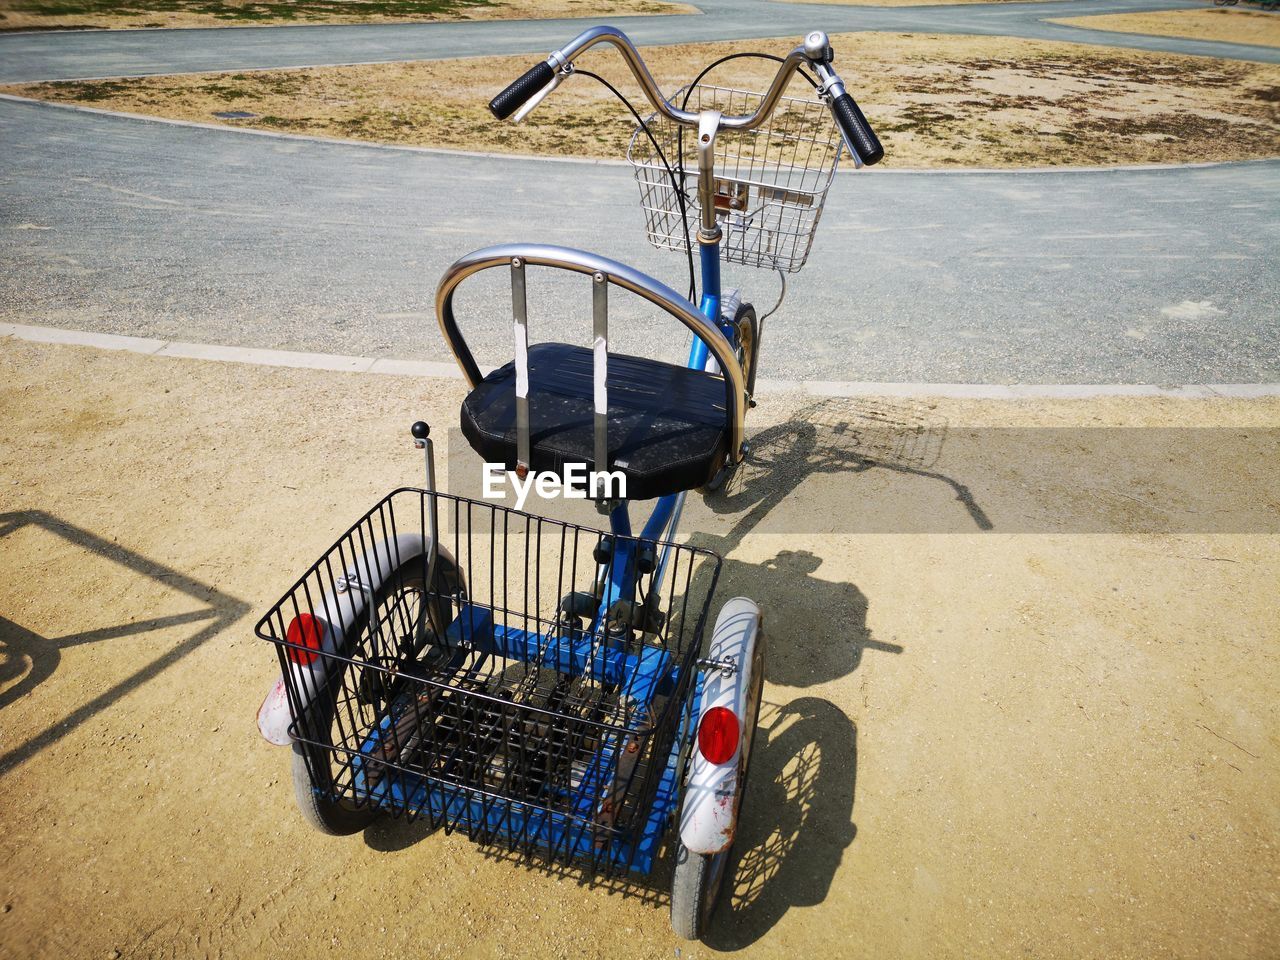 transportation, shopping cart, vehicle, day, sunlight, no people, nature, shadow, absence, mode of transportation, road, bicycle, outdoors, land, cart, land vehicle, beach